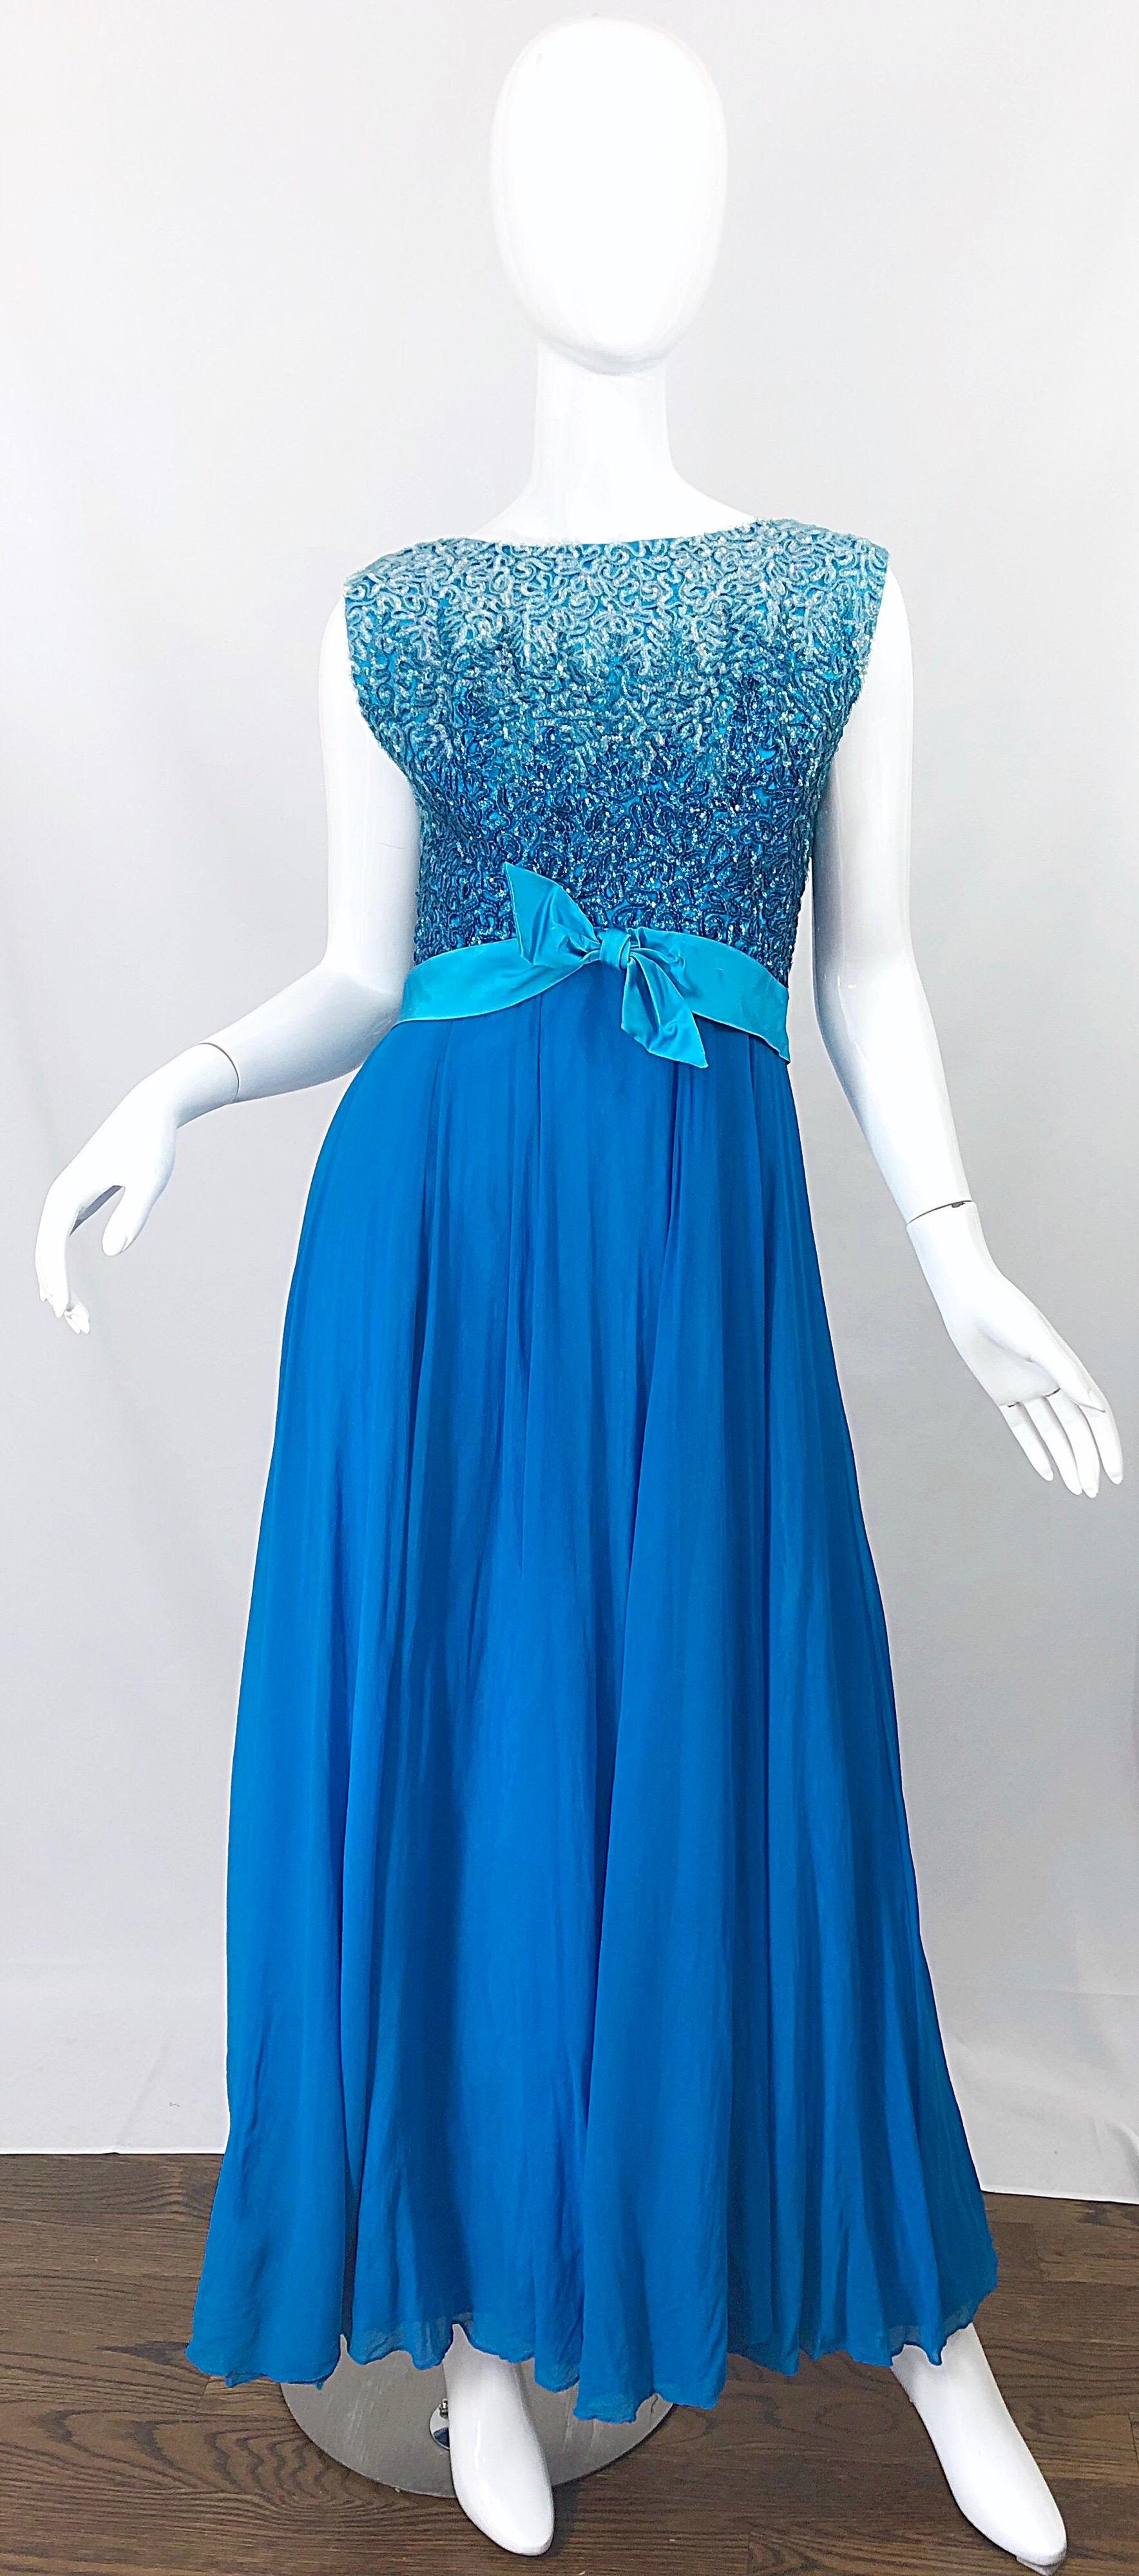 1960s Emma Domb Turquoise Blue Ombre Sequined Silk Chiffon Vintage 60s Gown For Sale 8